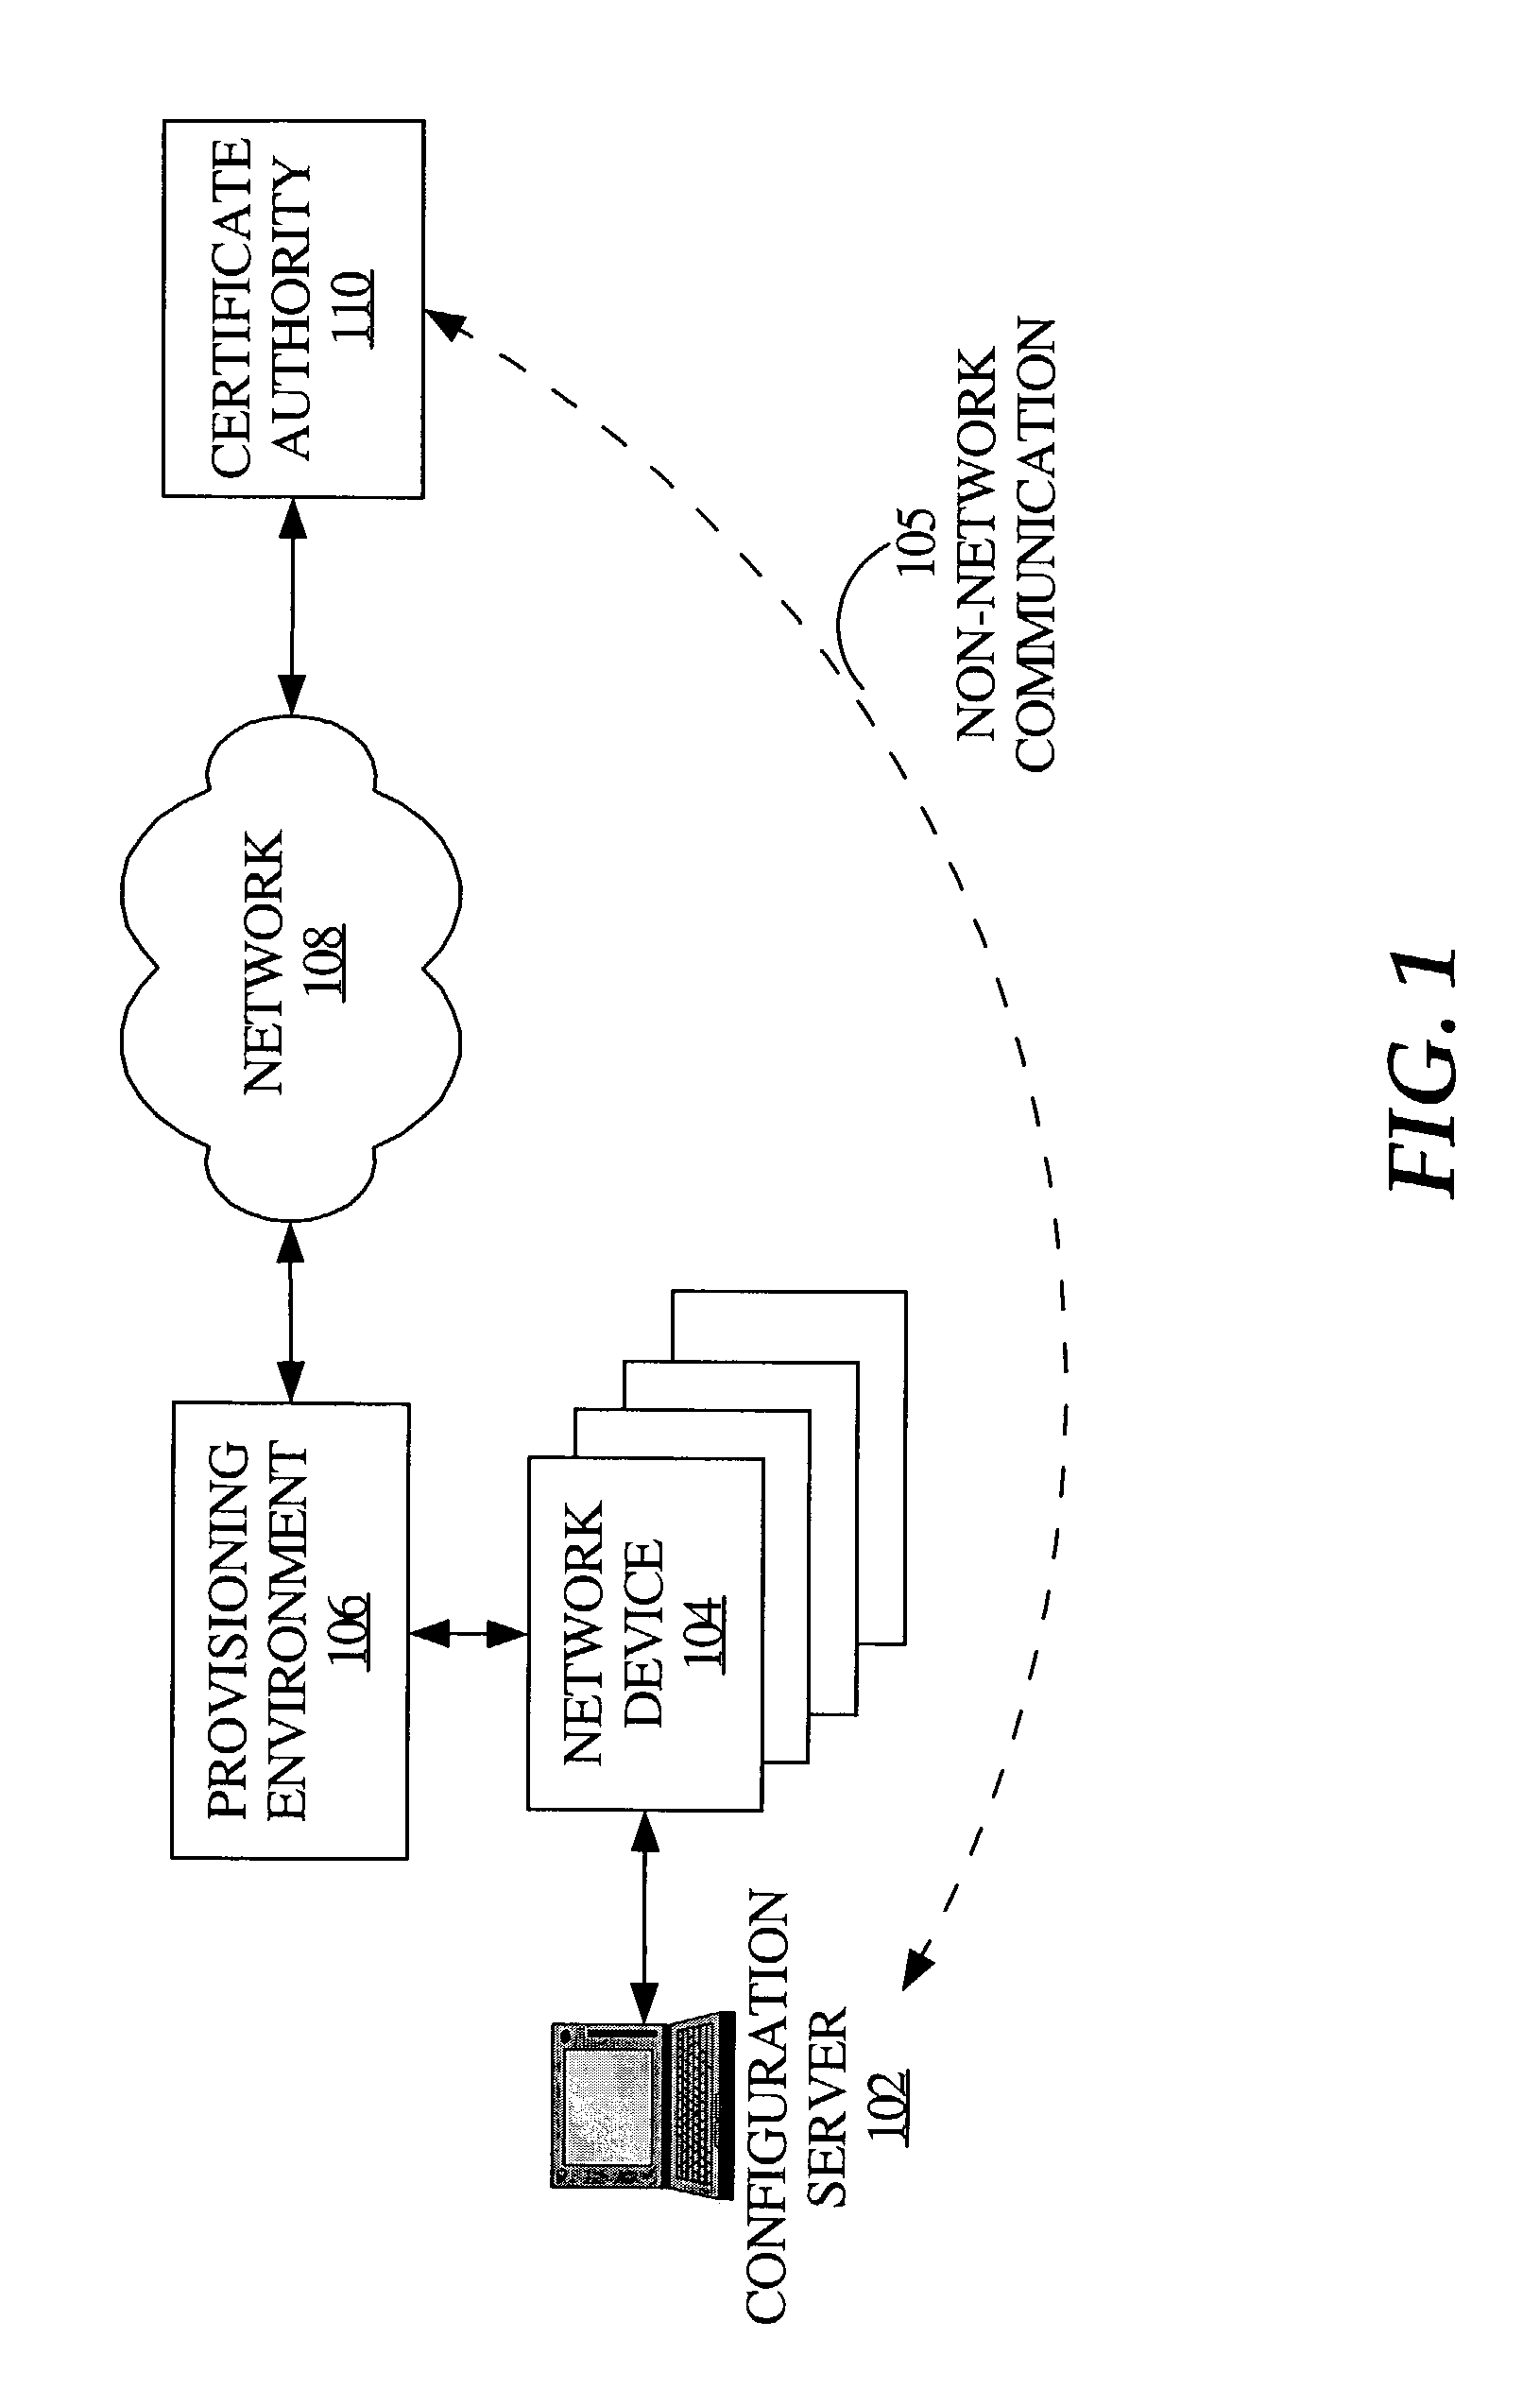 Method and apparatus for integrated provisioning of a network device with configuration information and identity certification